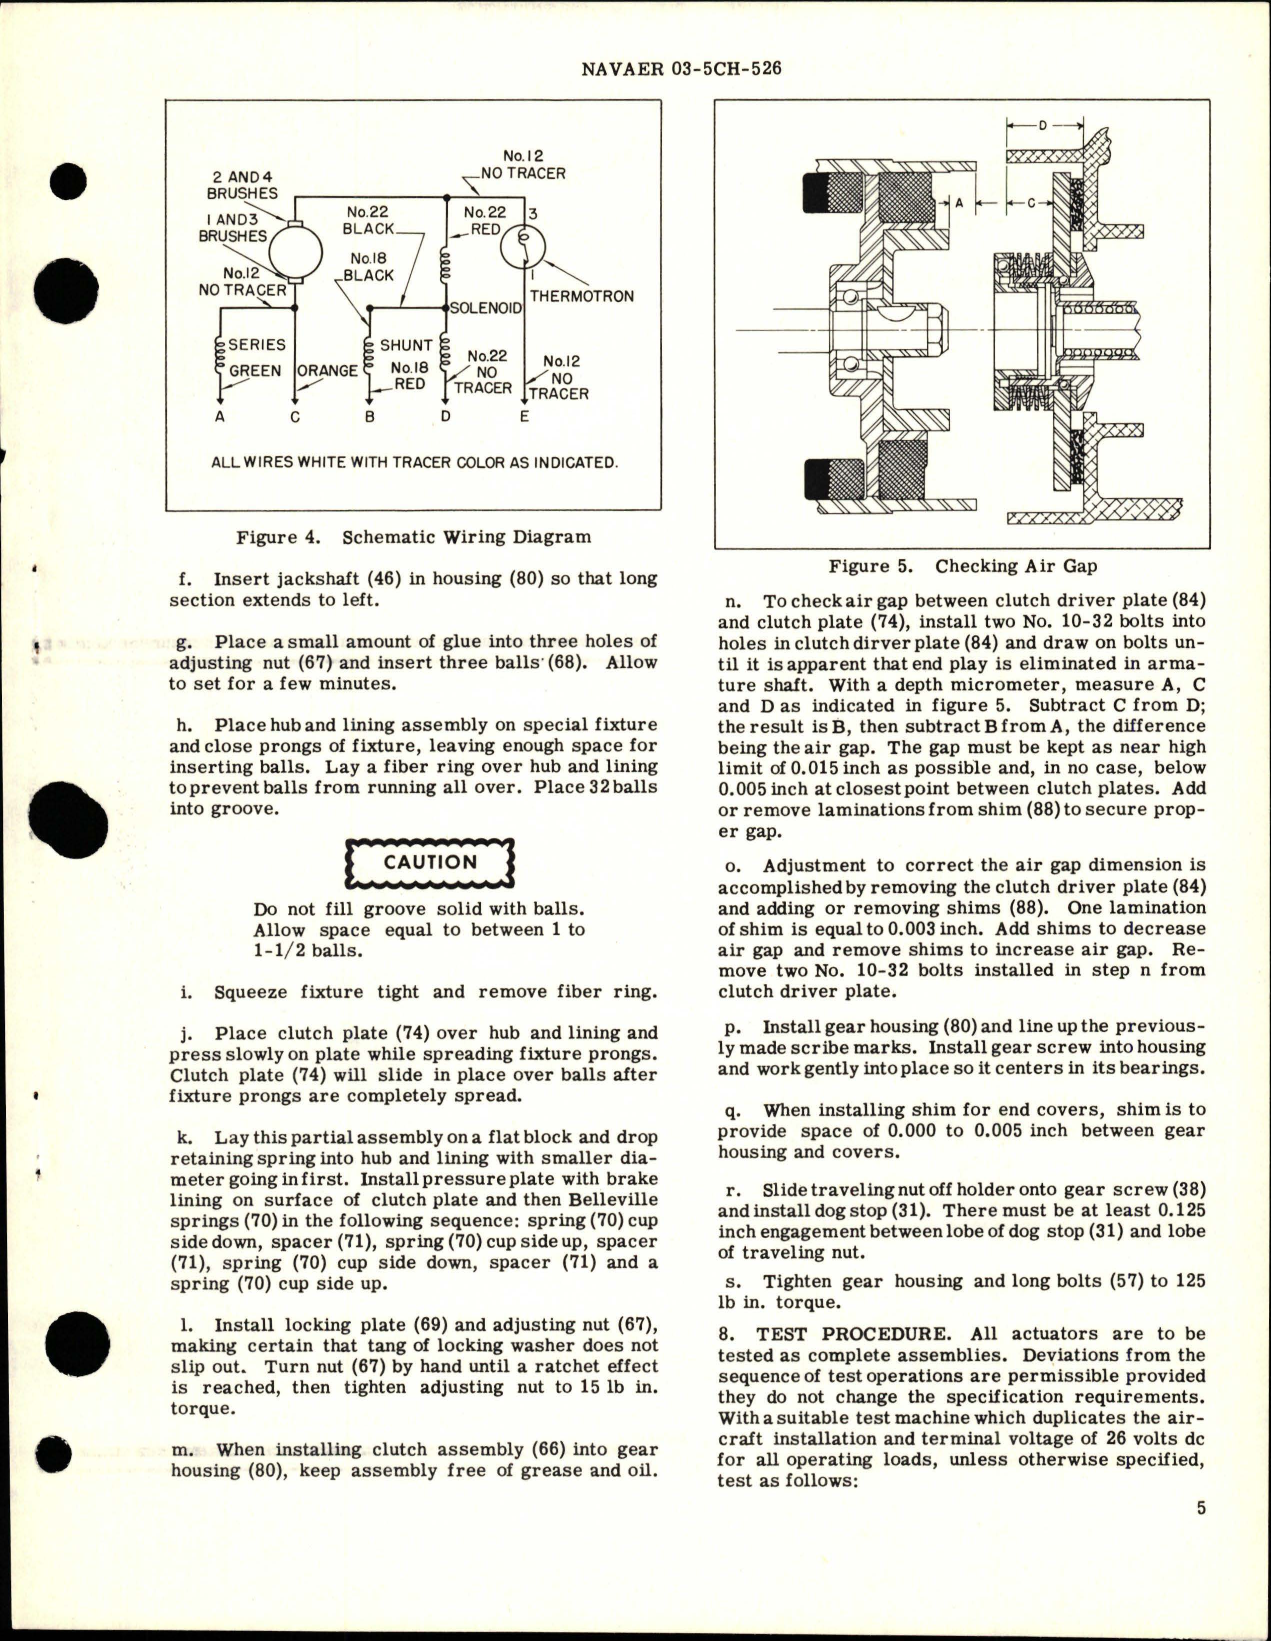 Sample page 5 from AirCorps Library document: Overhaul Instructions with Parts Breakdown for Actuator - Model A7620-1